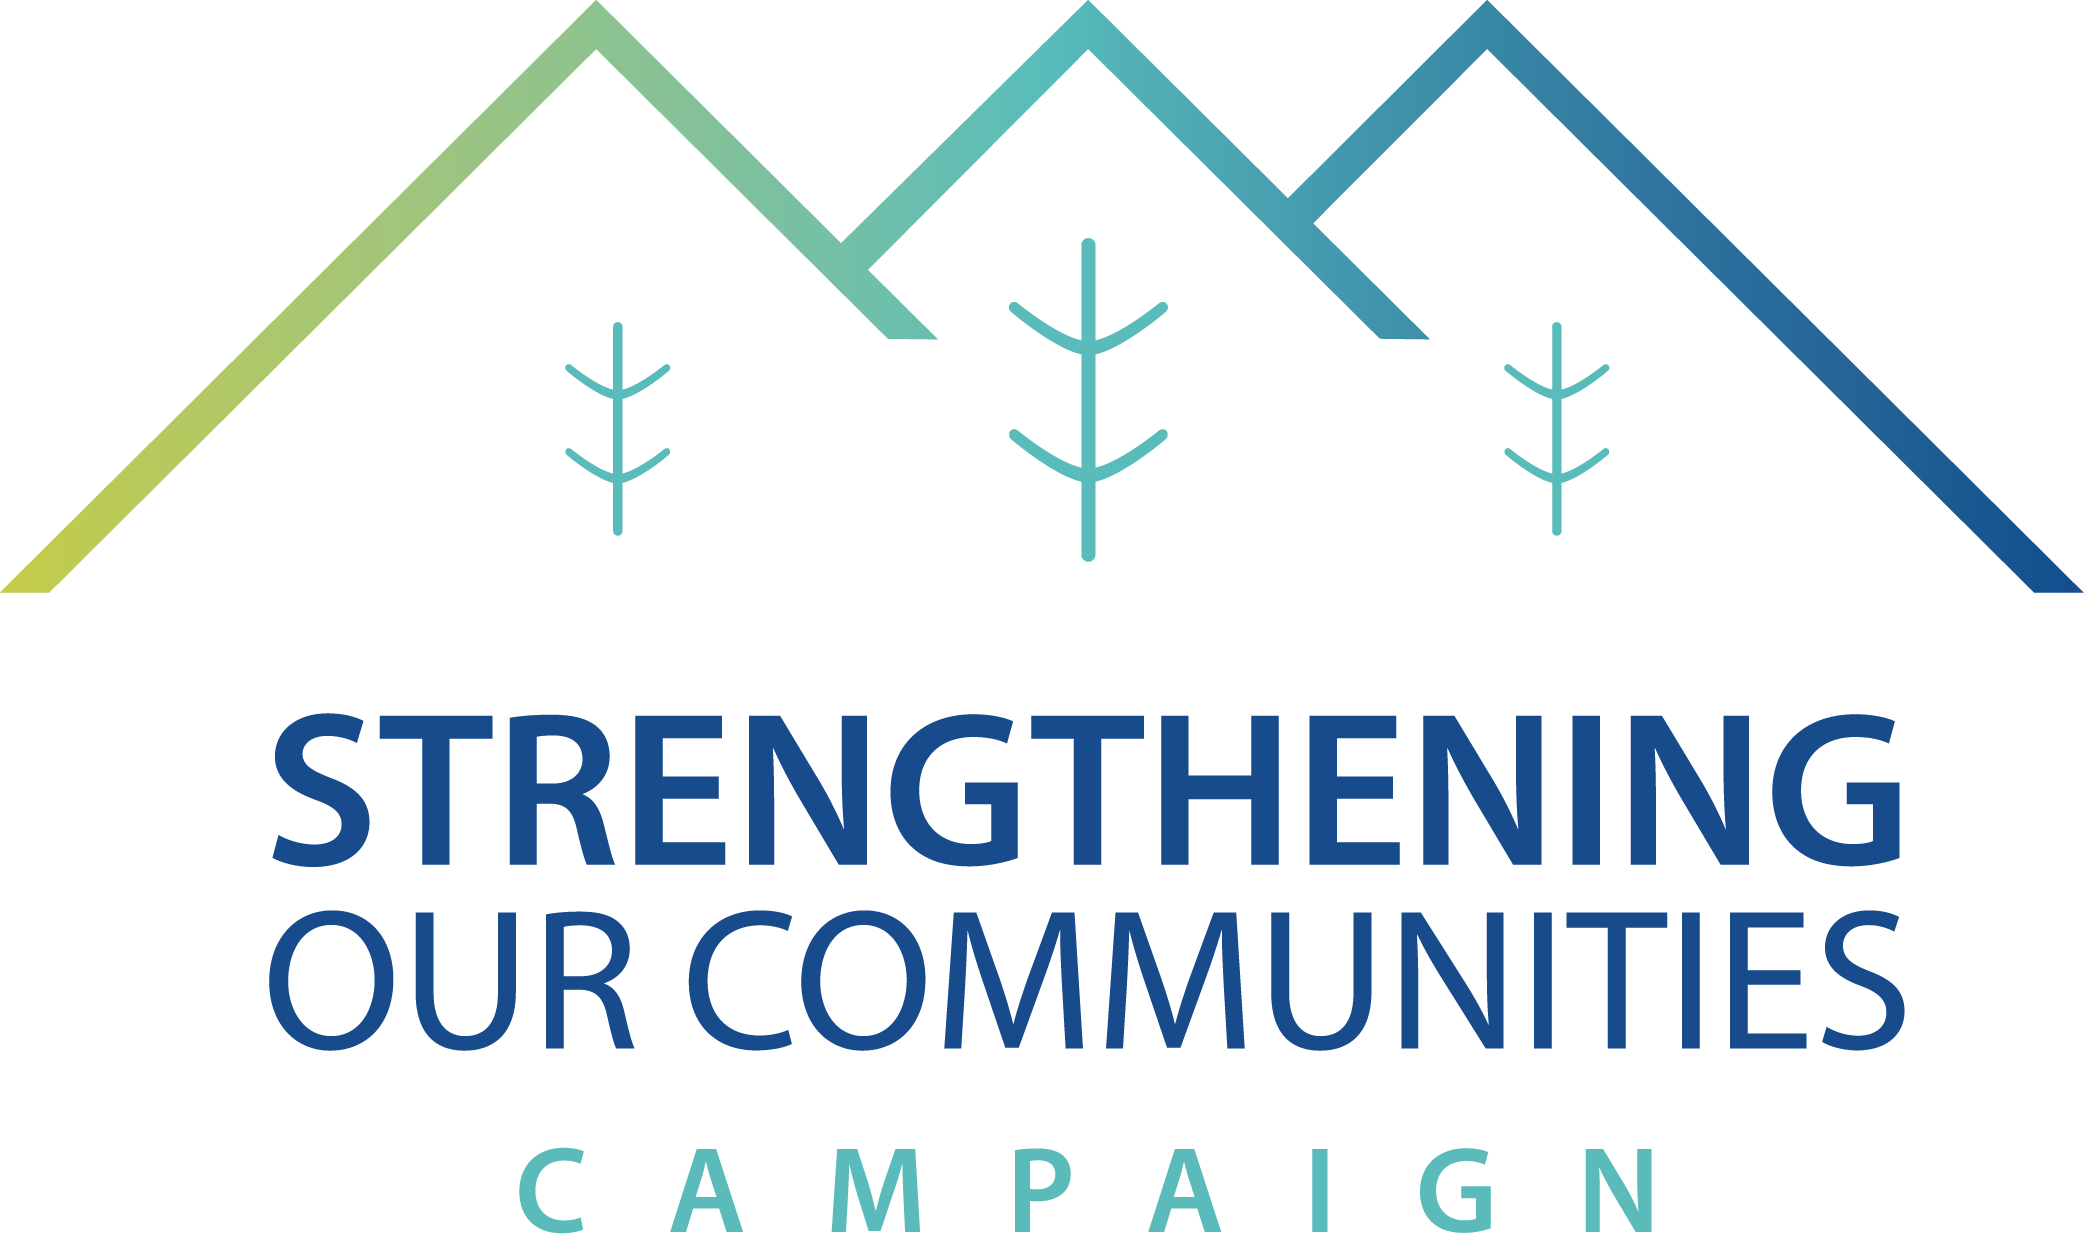 Strengthening Our Communities Campaign